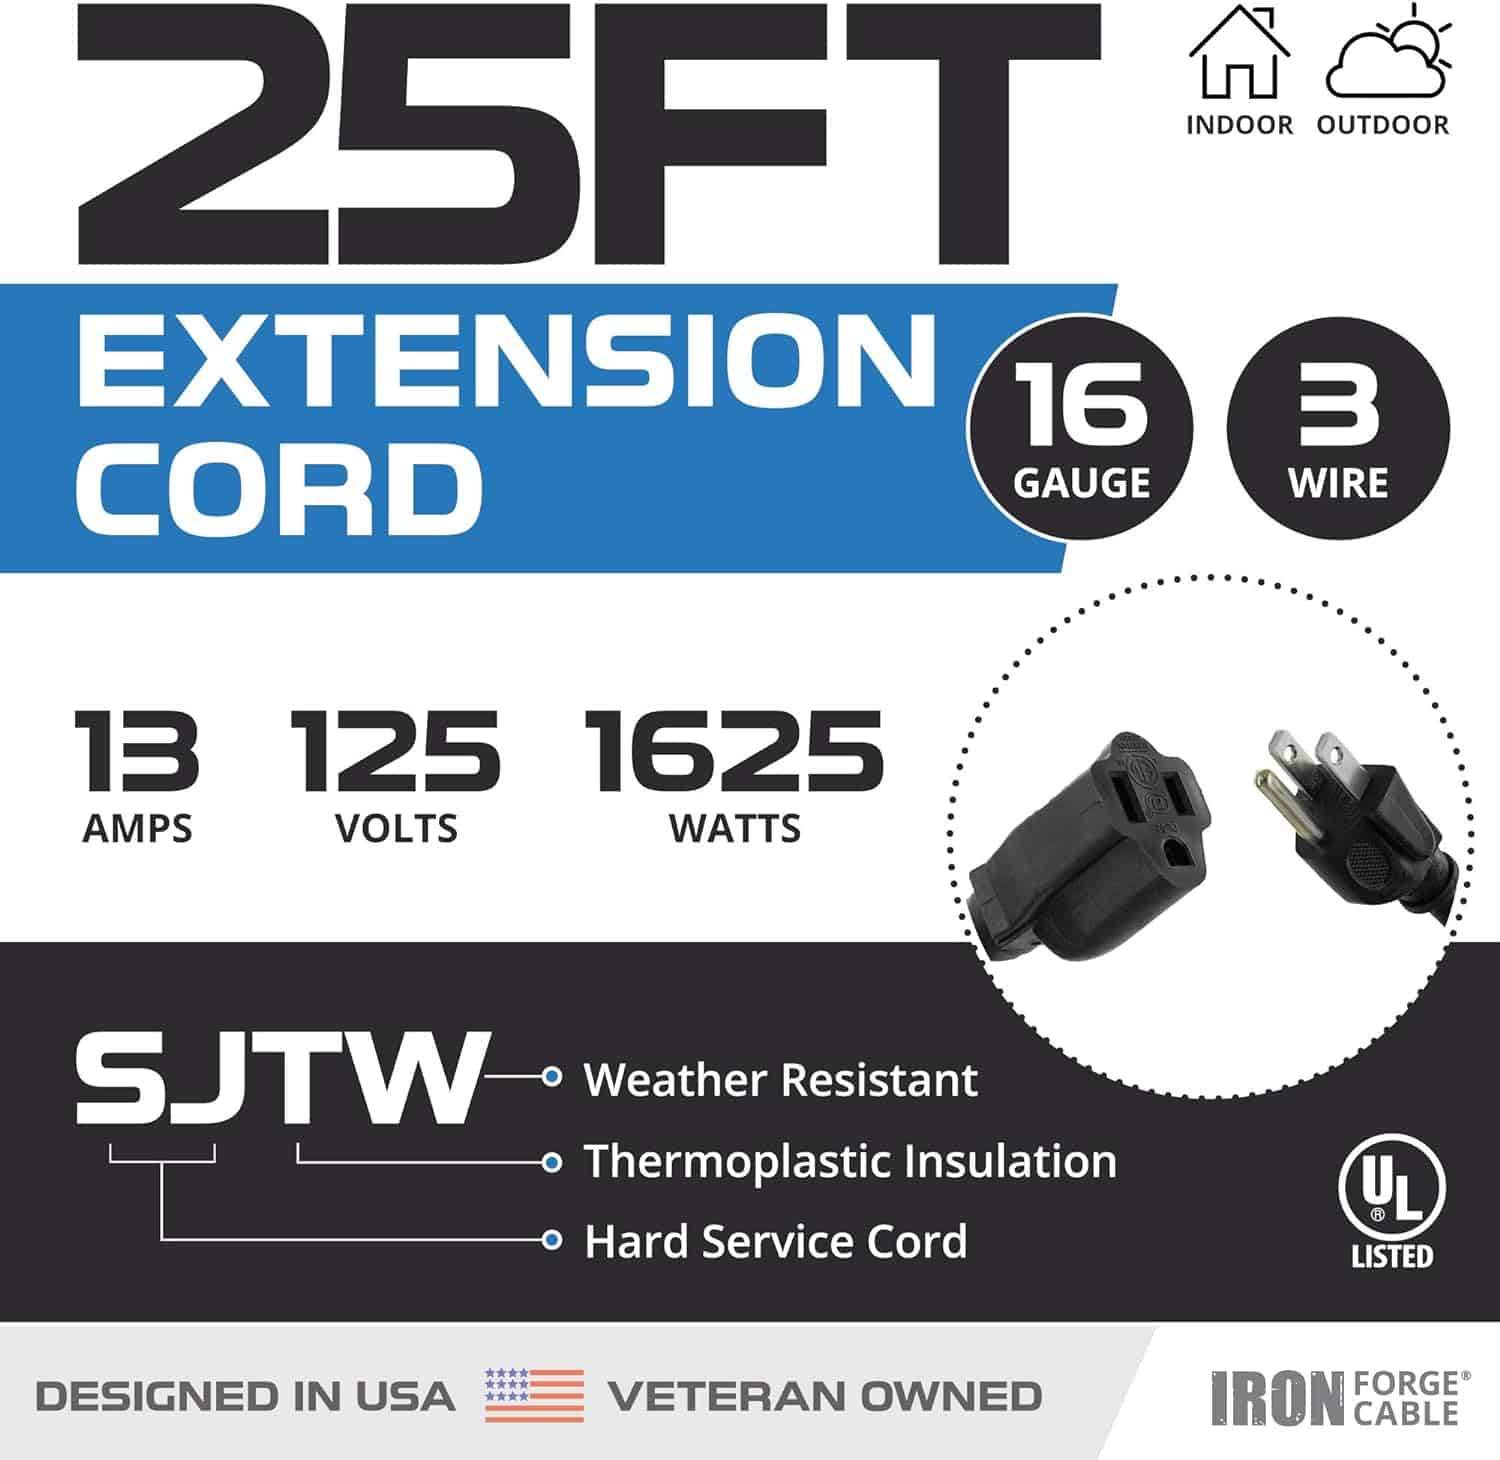 Iron Forge Cable 2 Pack 25 Ft Extension Cord, 1 63 Black 25 Foot Extension Cord Indoor Outdoor Use, 3 Prong Multipack Weatherproof Extension Cord Gr 3